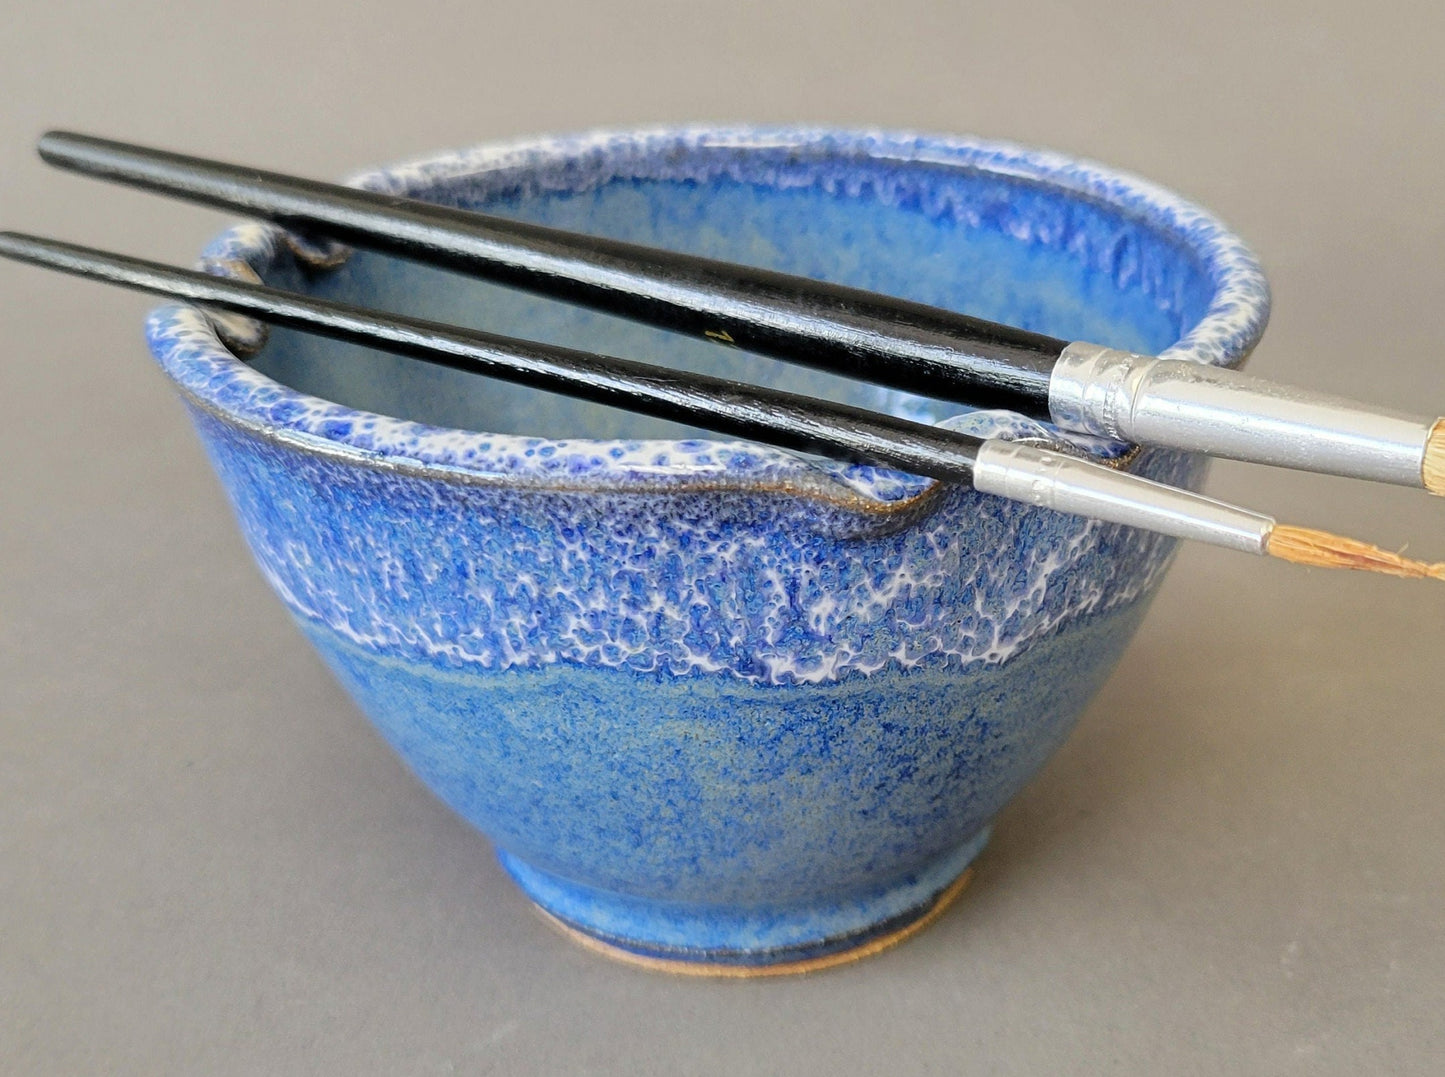 Paint Watercolor Rinse Bowl with Brush Rest Paintbrush Stand for Painters Artist Studio Craft Room Cup Blue White Speckled